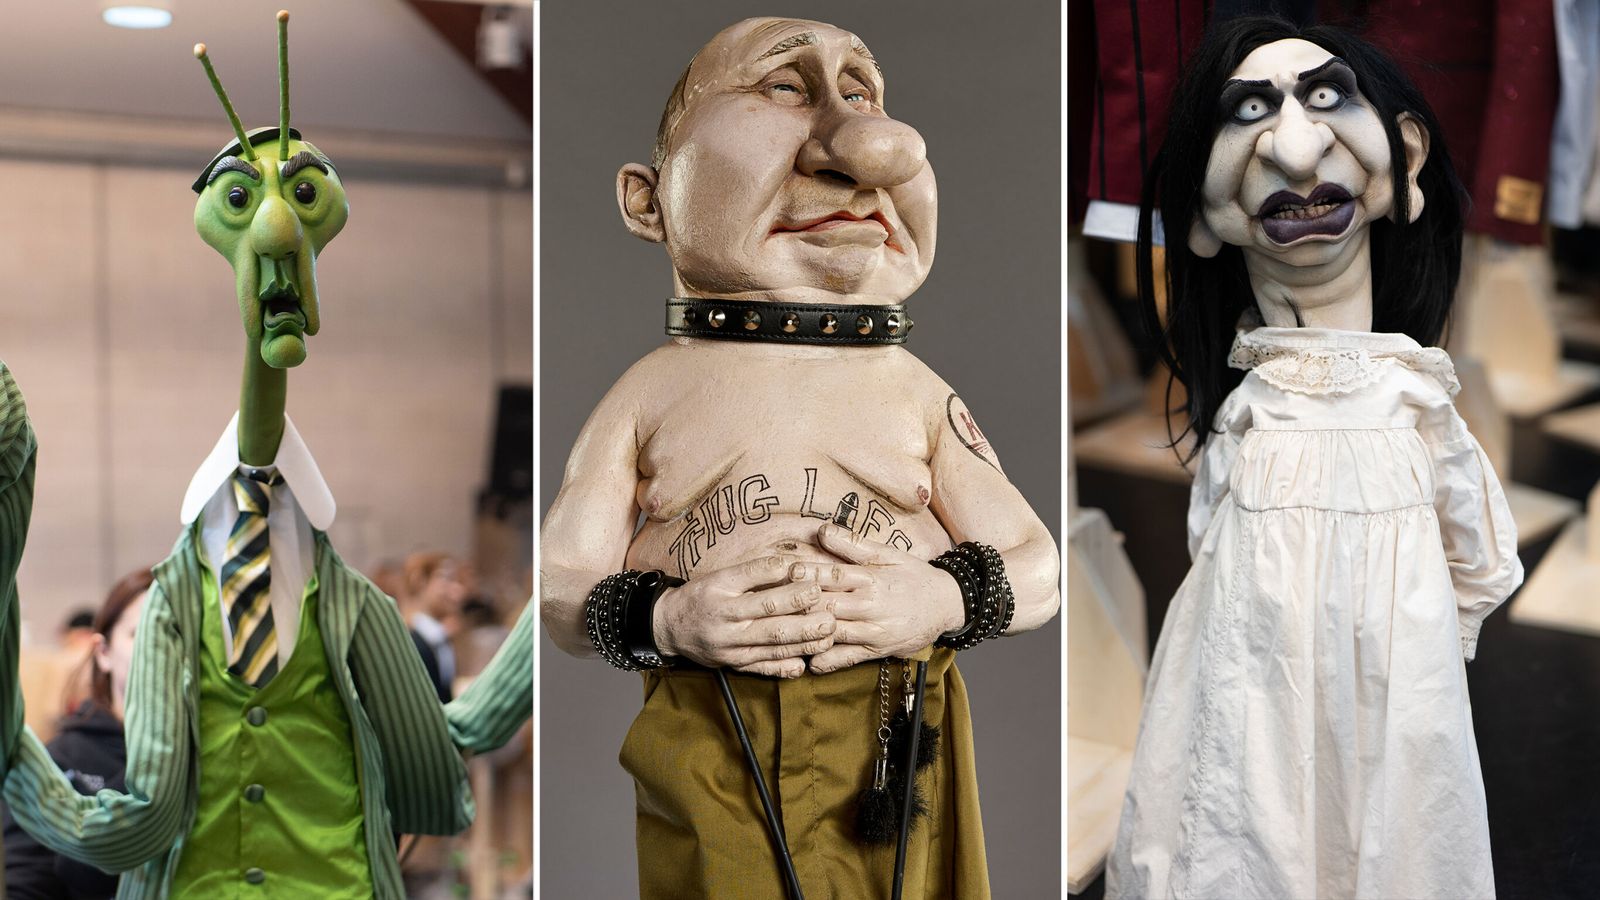 Spitting Image stages revival - and one politician who makes the cut is the 'surprise hit of the show'